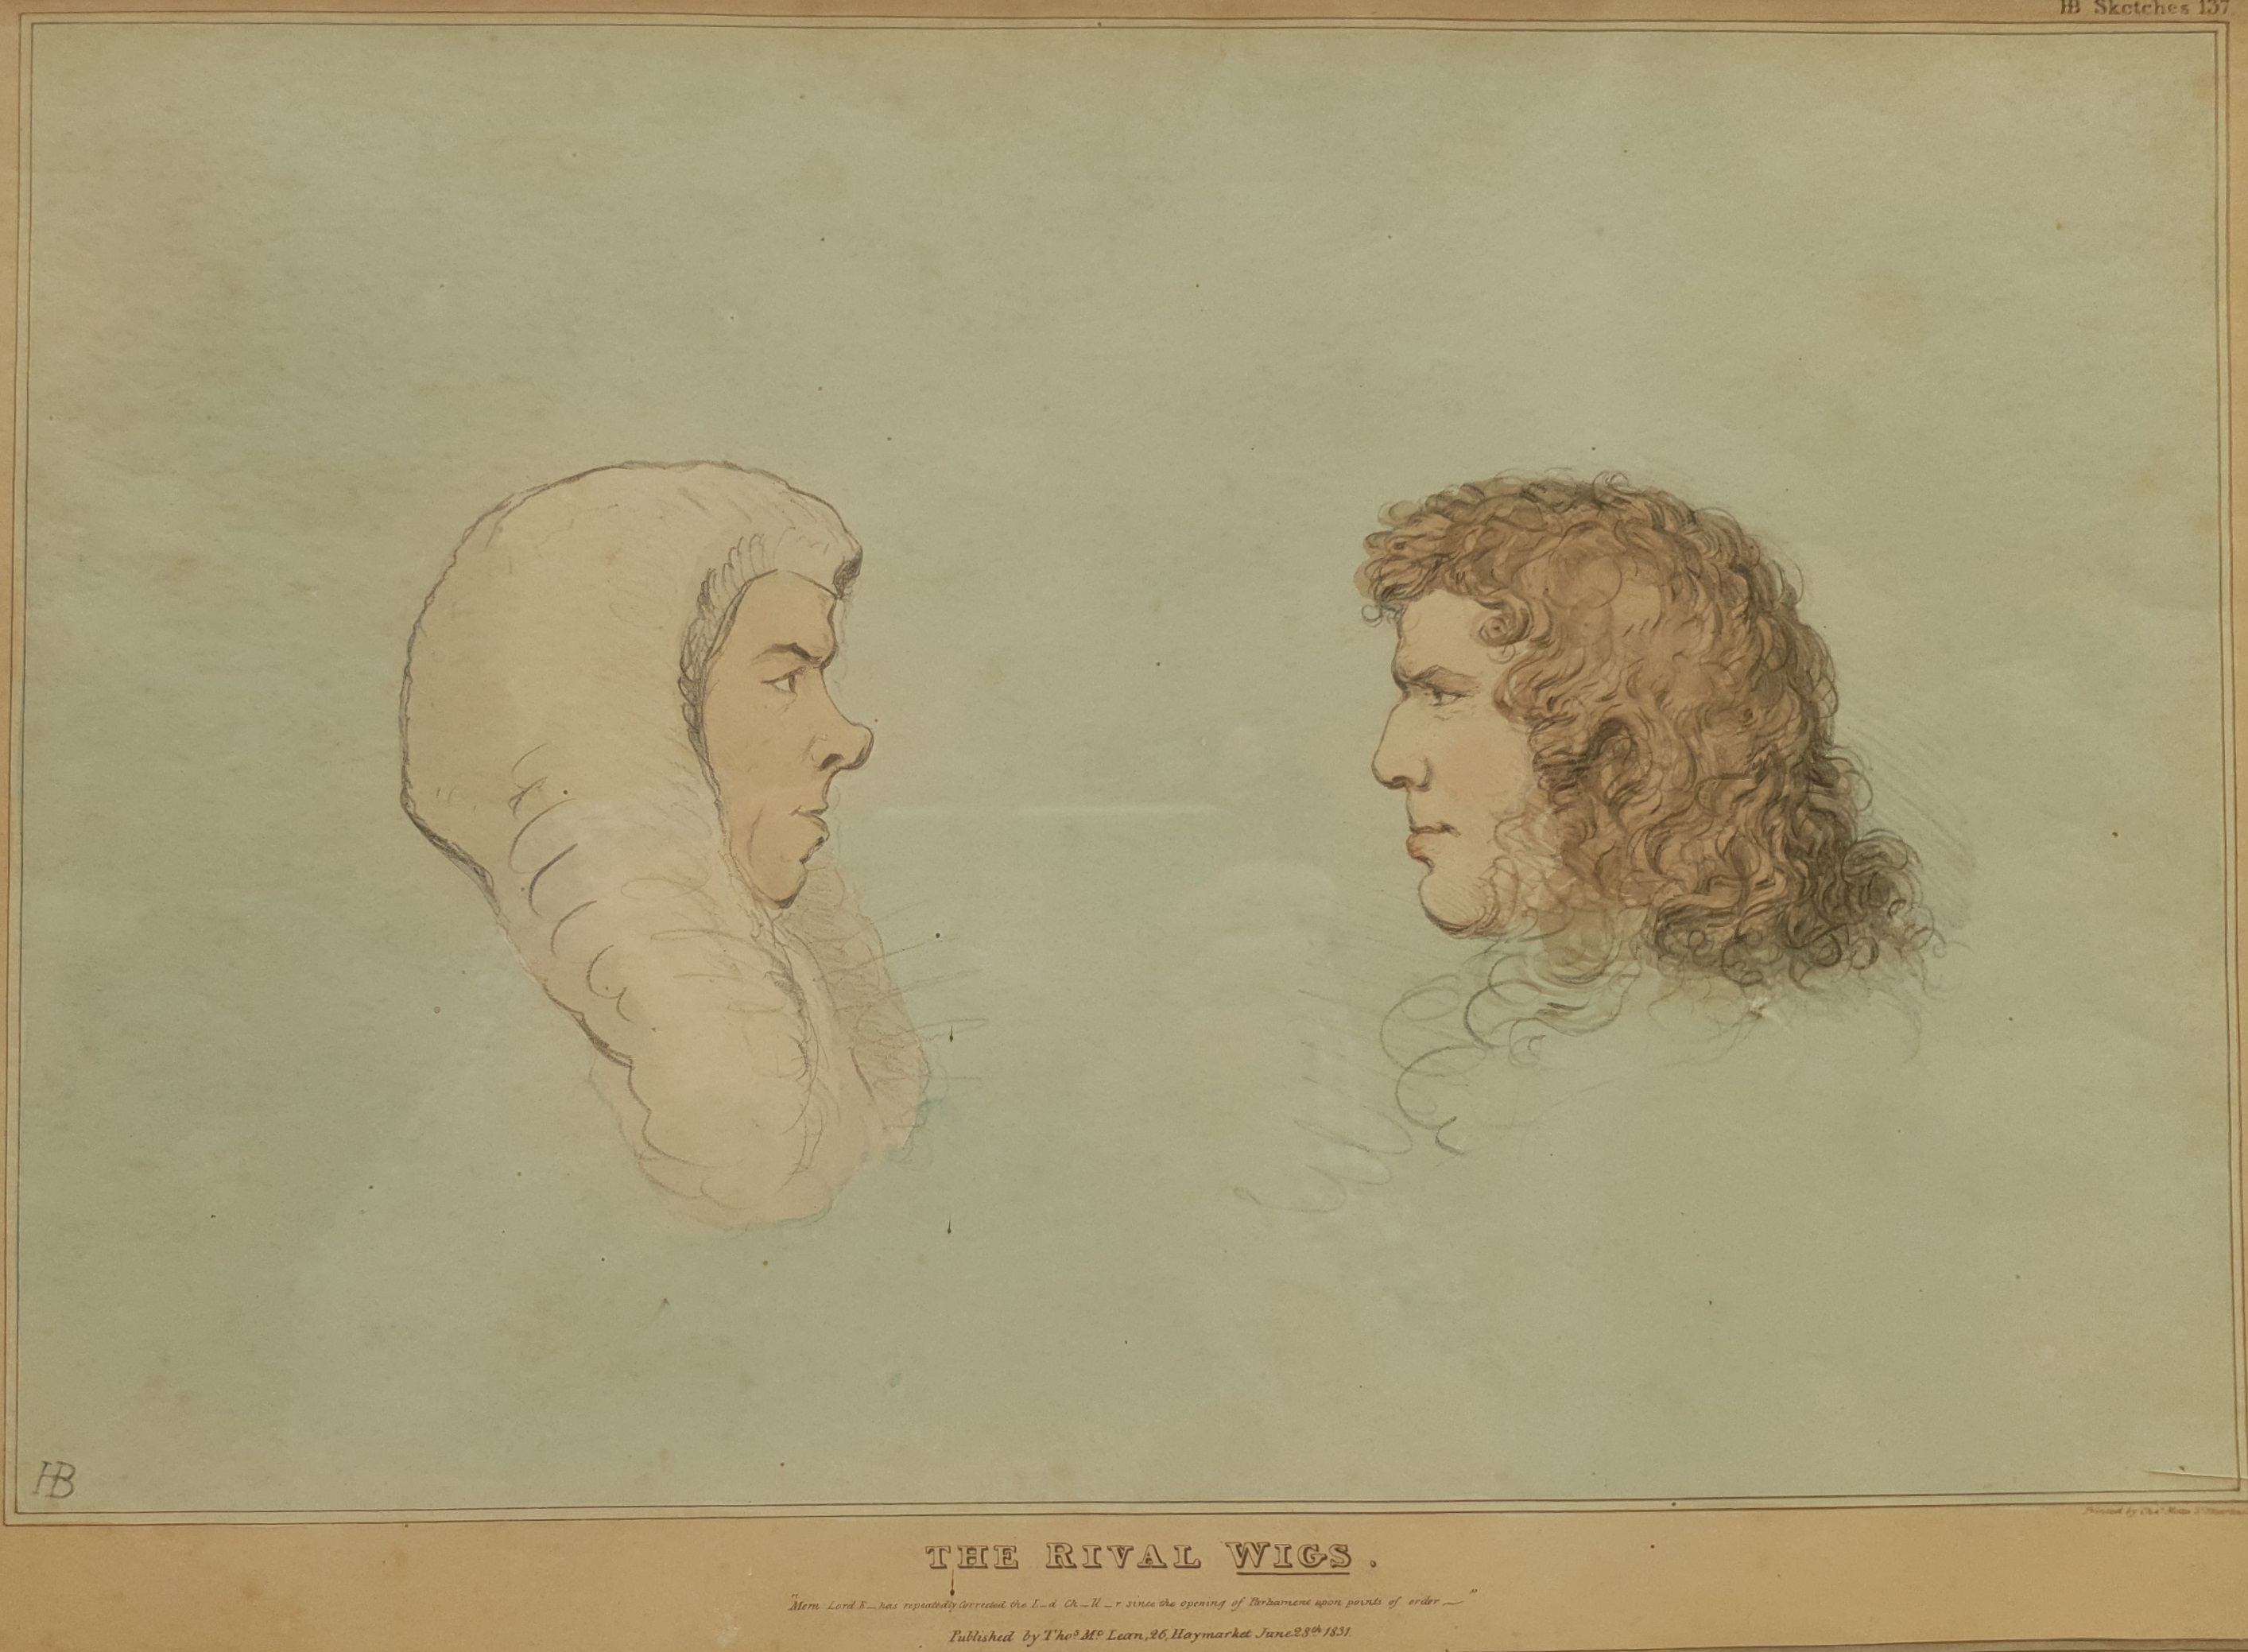 John 'HB' Doyle (British 1797-1868): 'The Rival Wigs' - Henry Brougham